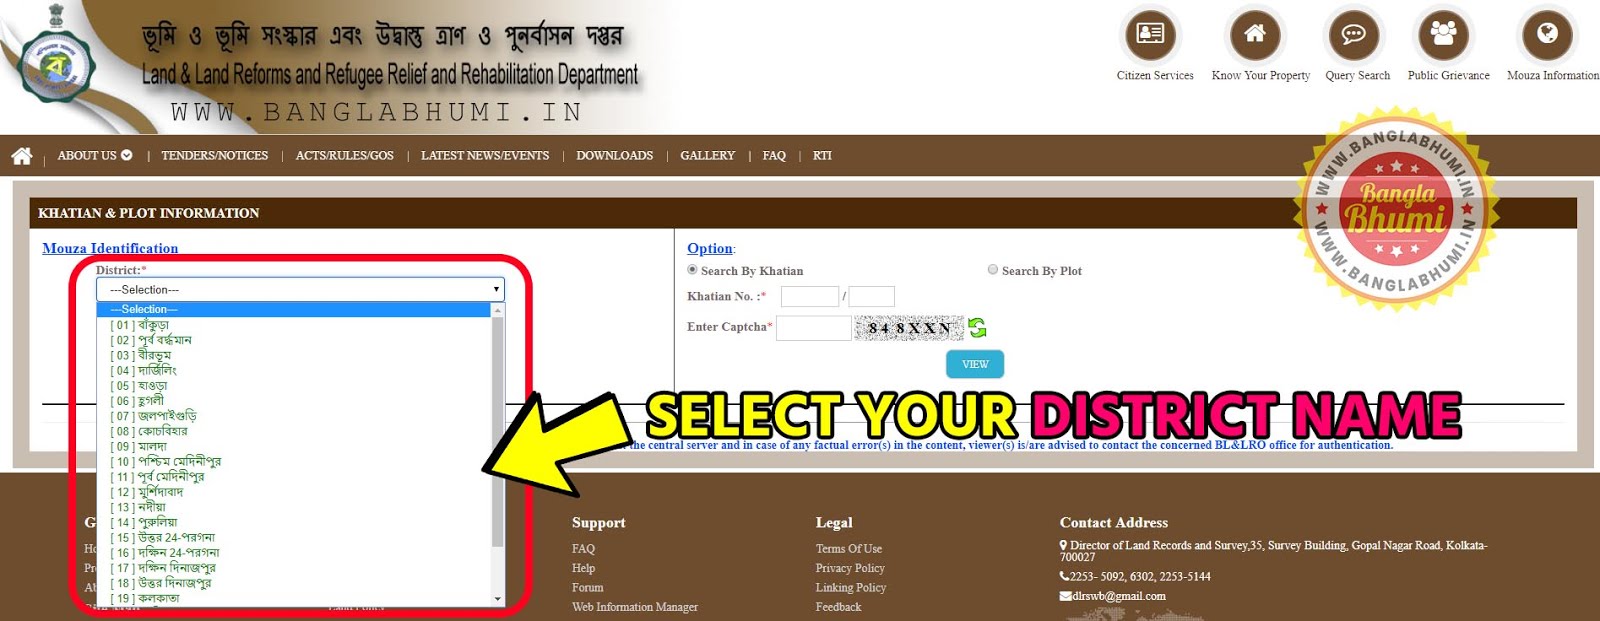 Find West Bengal Land Records With Khatian Number Plot Number -  Step 3